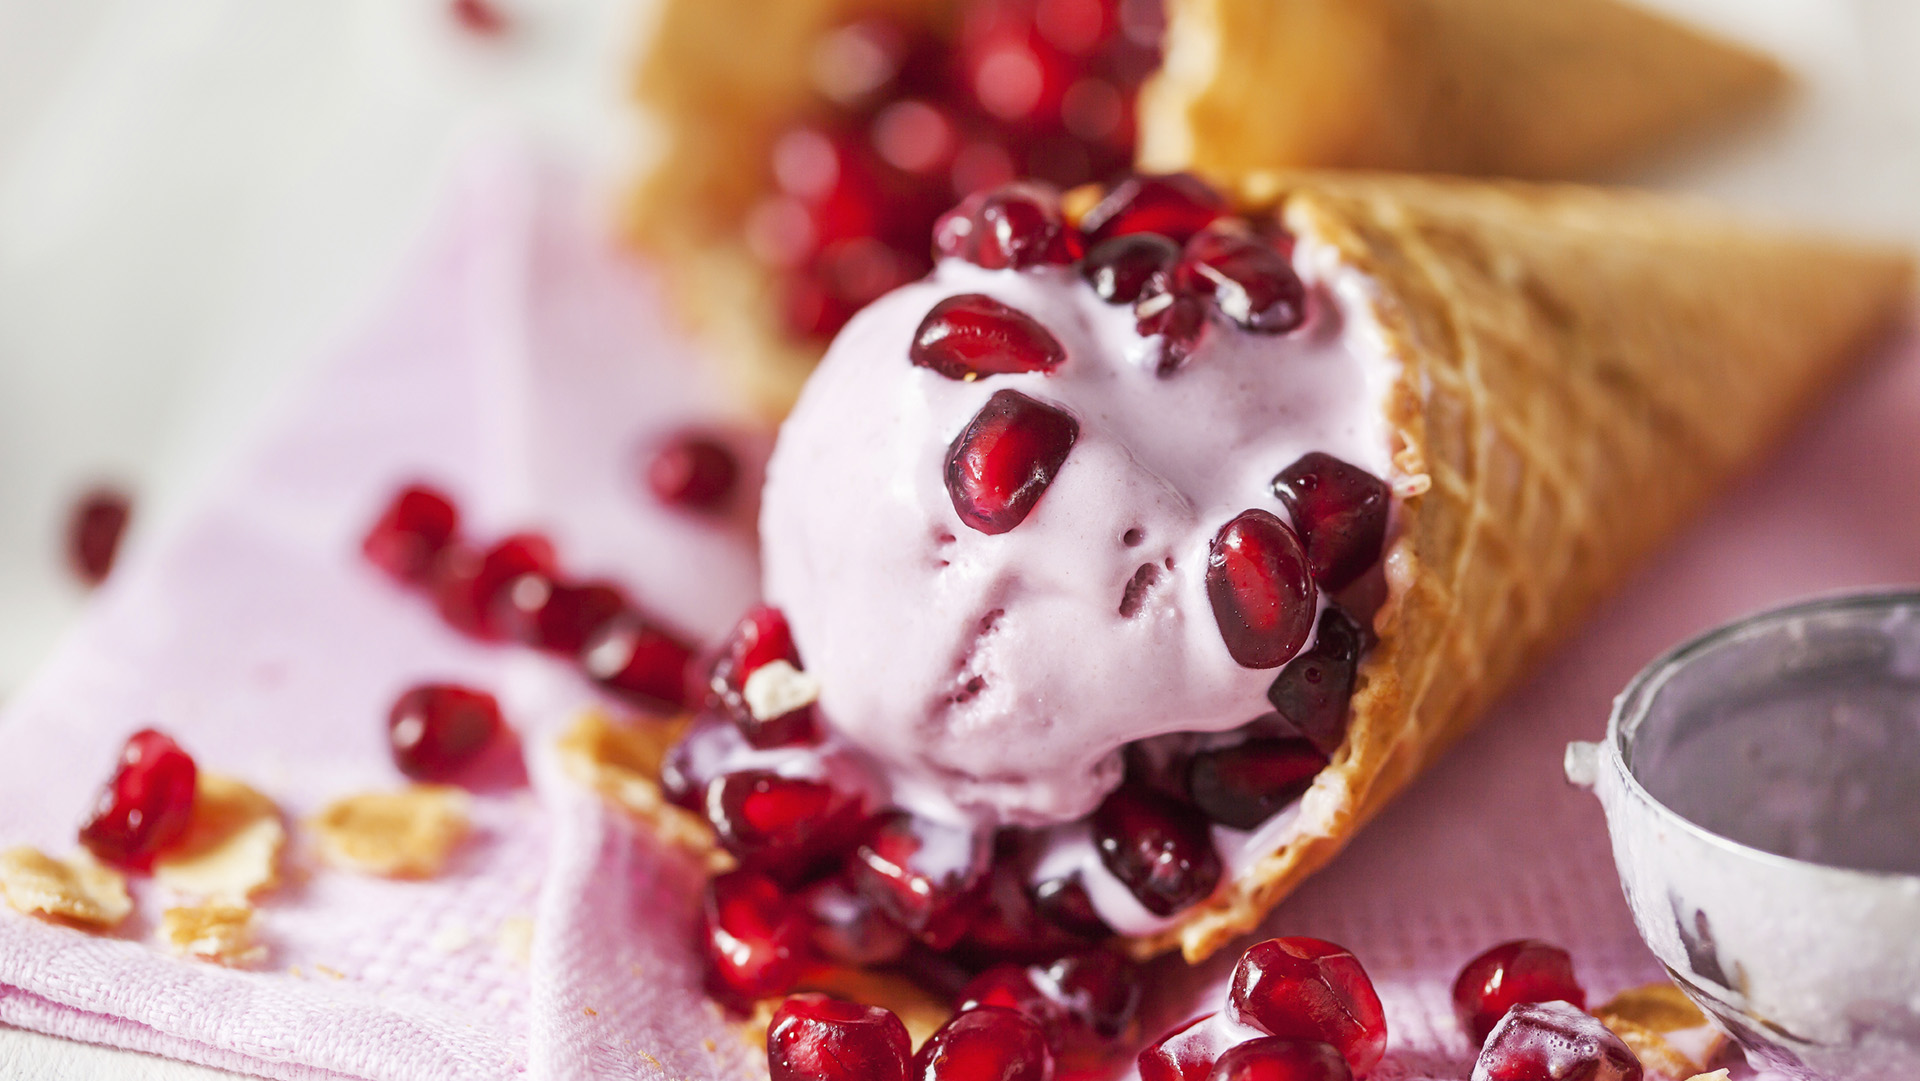 Ice cream in a waffle cone with pomegranate seeds